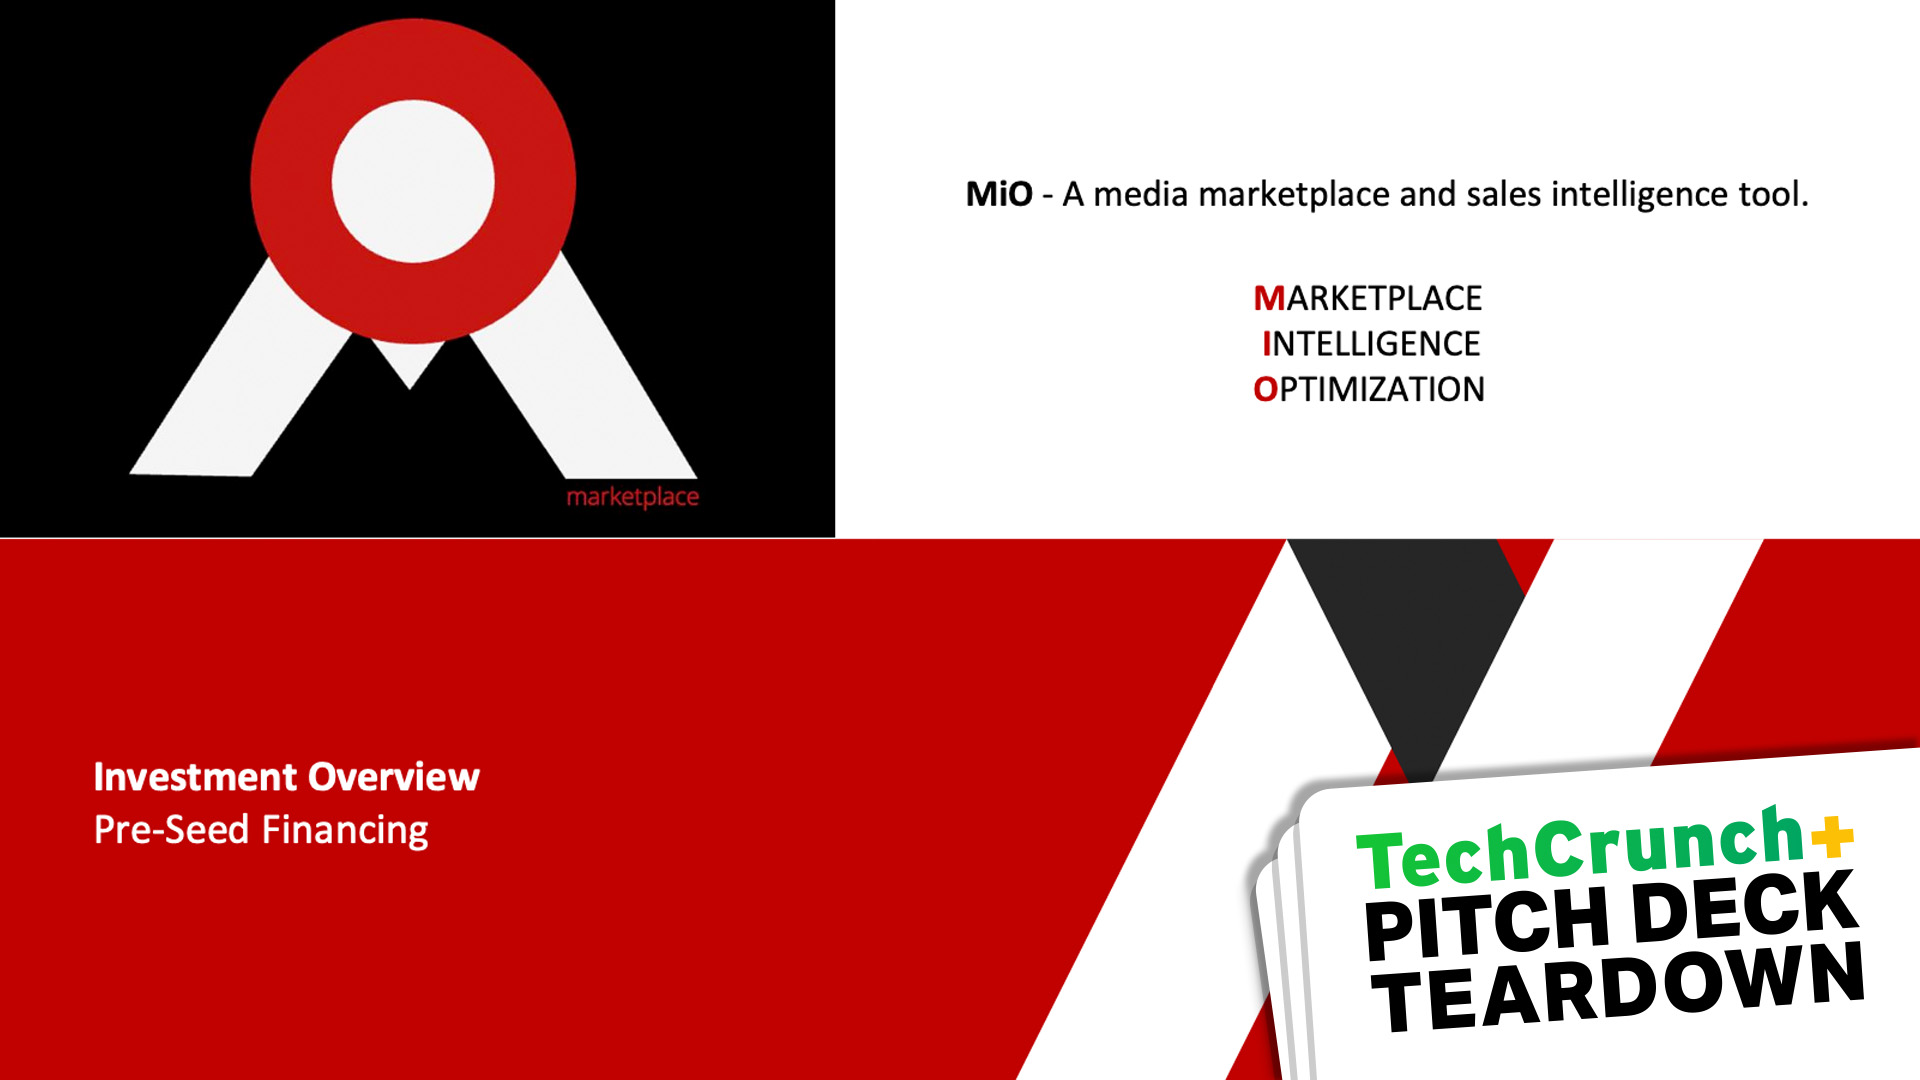 MiO - A media marketplace and sales intelligence tool. MARKETPLACE INTELLIGENCE OPTIMIZATION